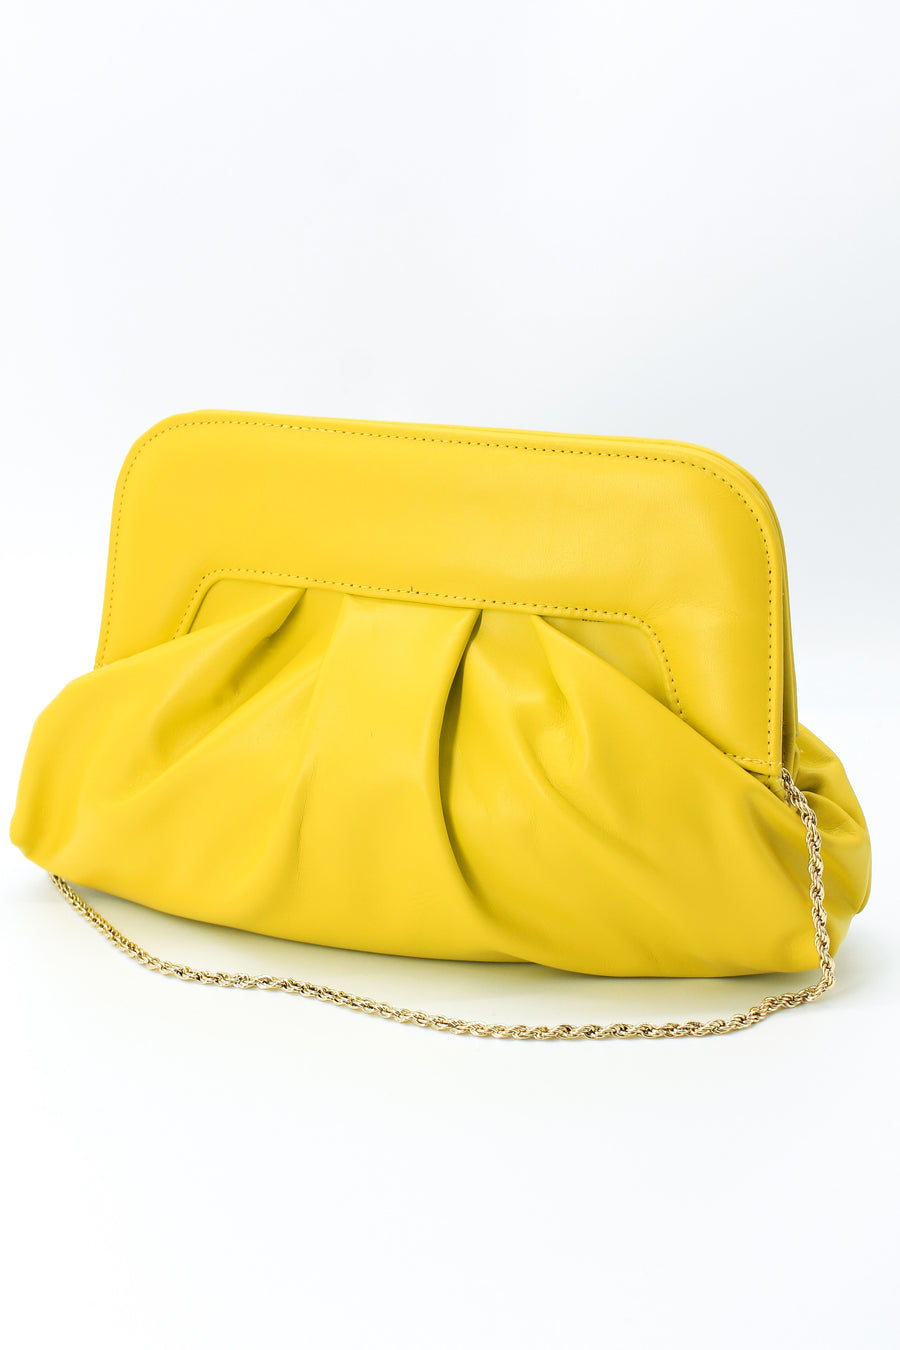 Marian 701 SS23 Yellow Leather